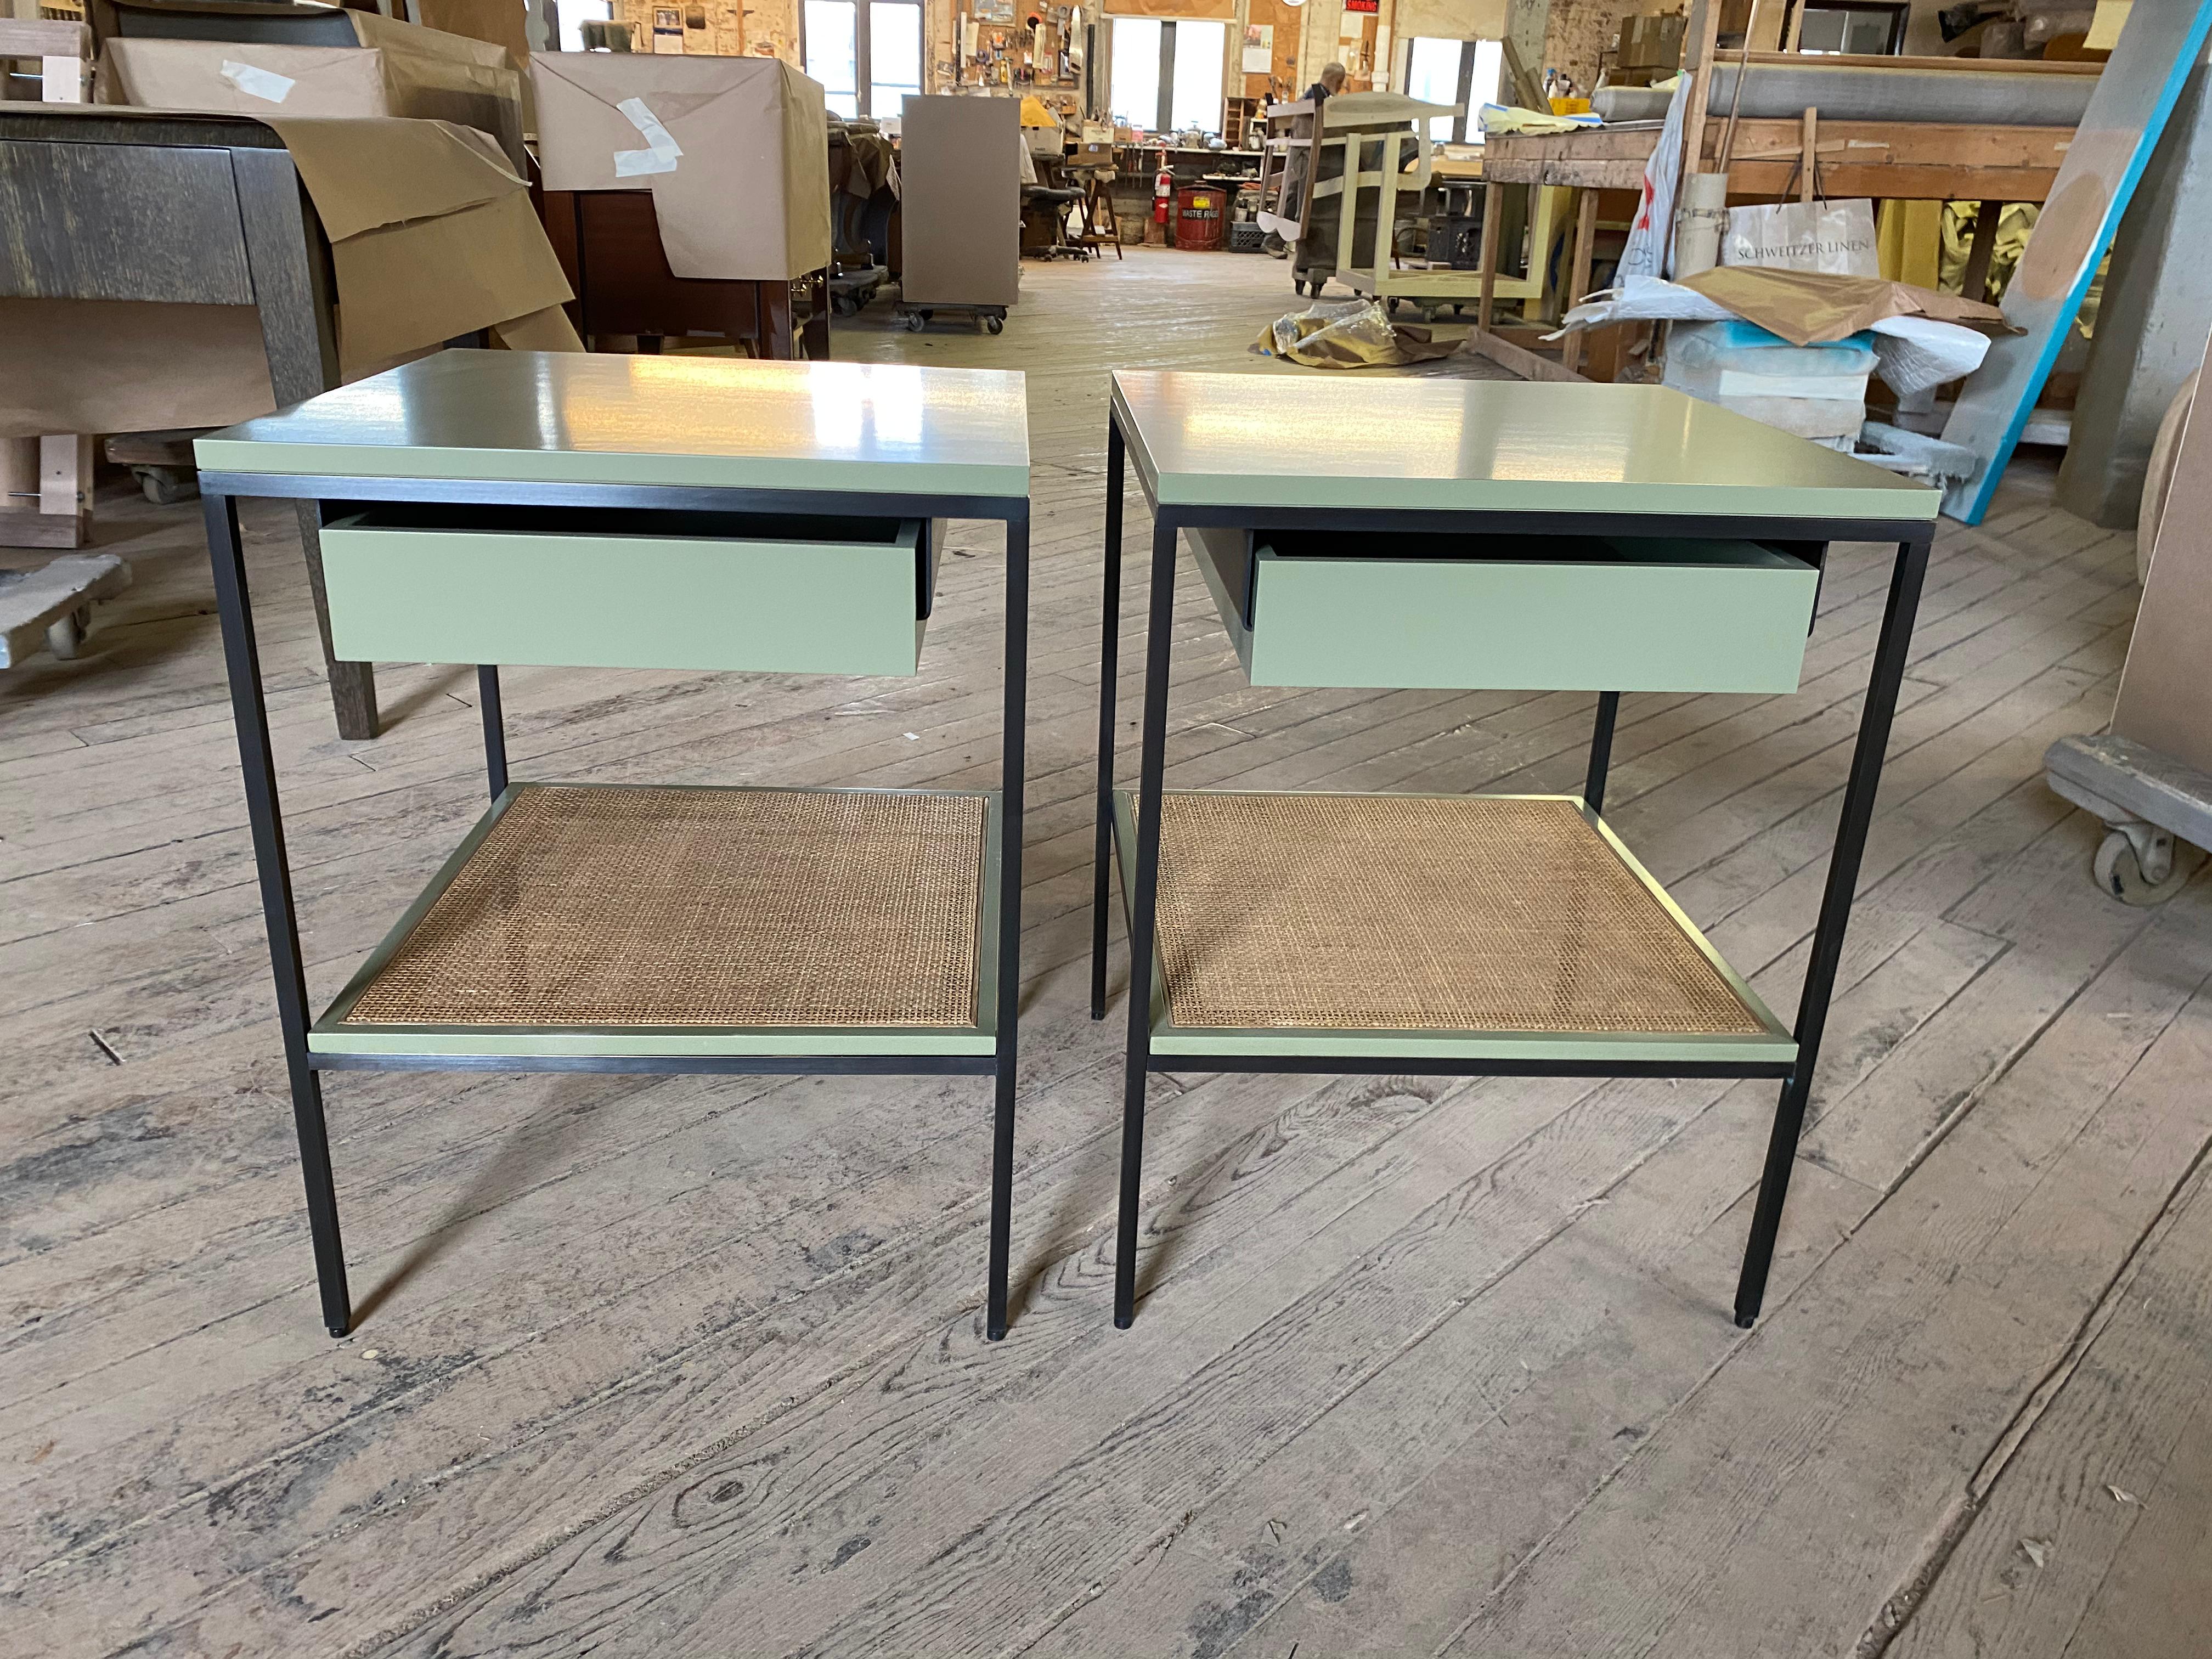 Our classic lacquer, cane and bronze bedside tables in our standard size. Shown here in BM Springfield Sage on oiled bronze frames with medium toned caned shelves. Made to order. Local manufacturing with flawless attention to detail.